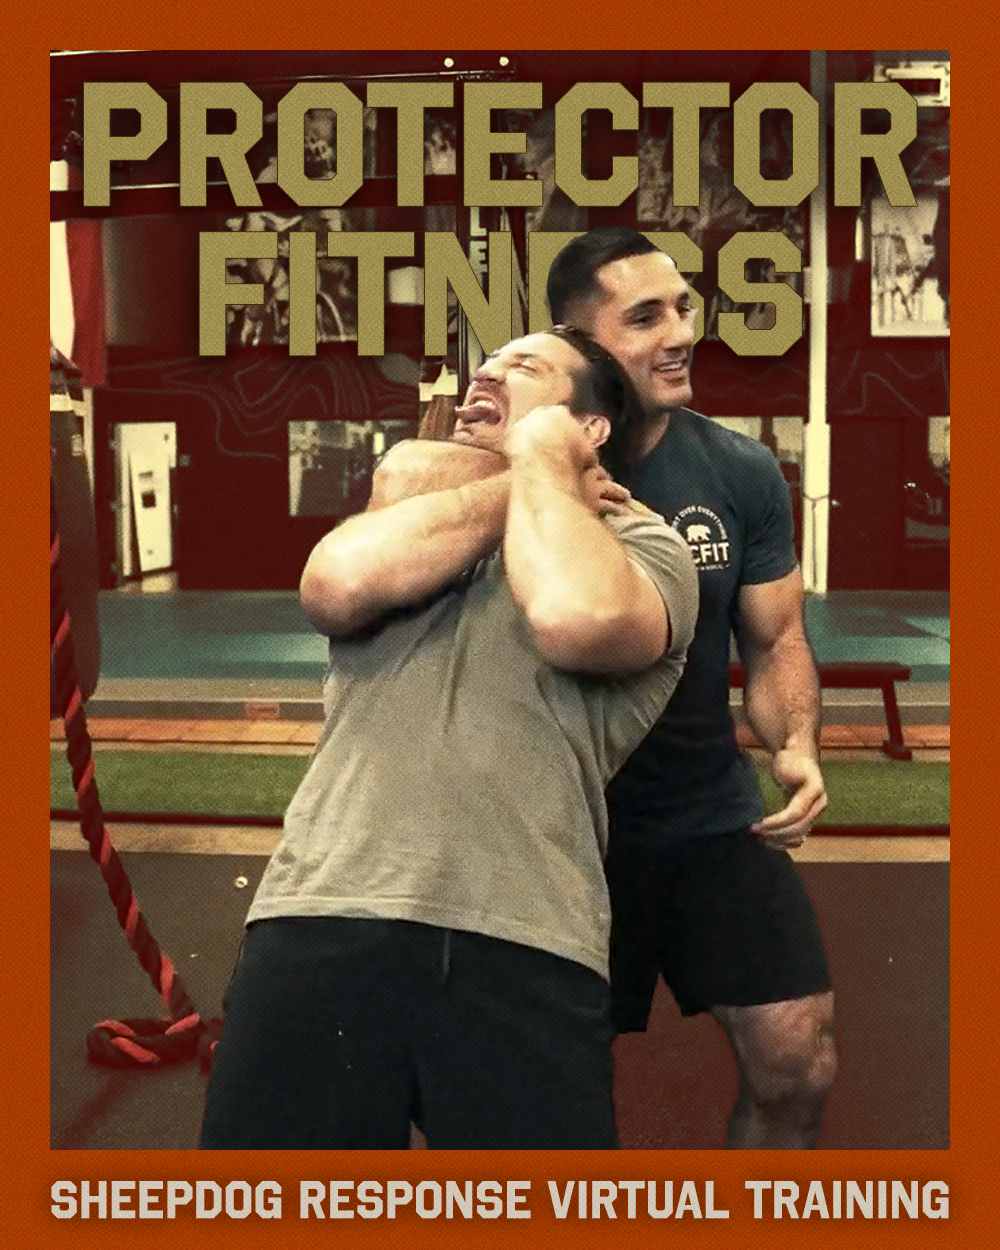 Protector Fitness Online Training